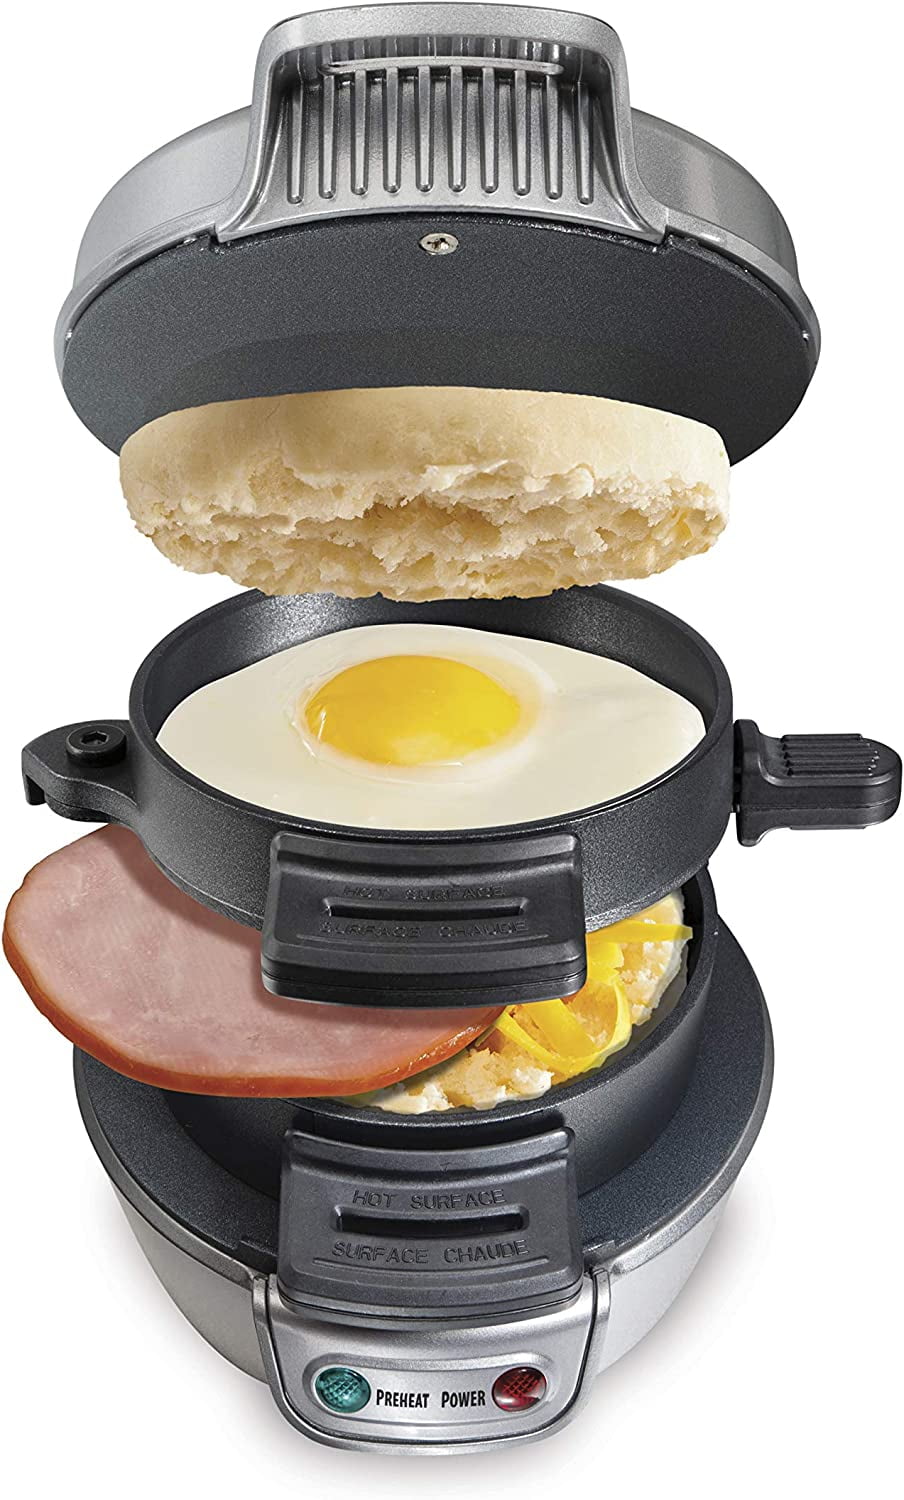 Breakfast Sandwich Maker with Egg Cooker Ring Customize Ingredients